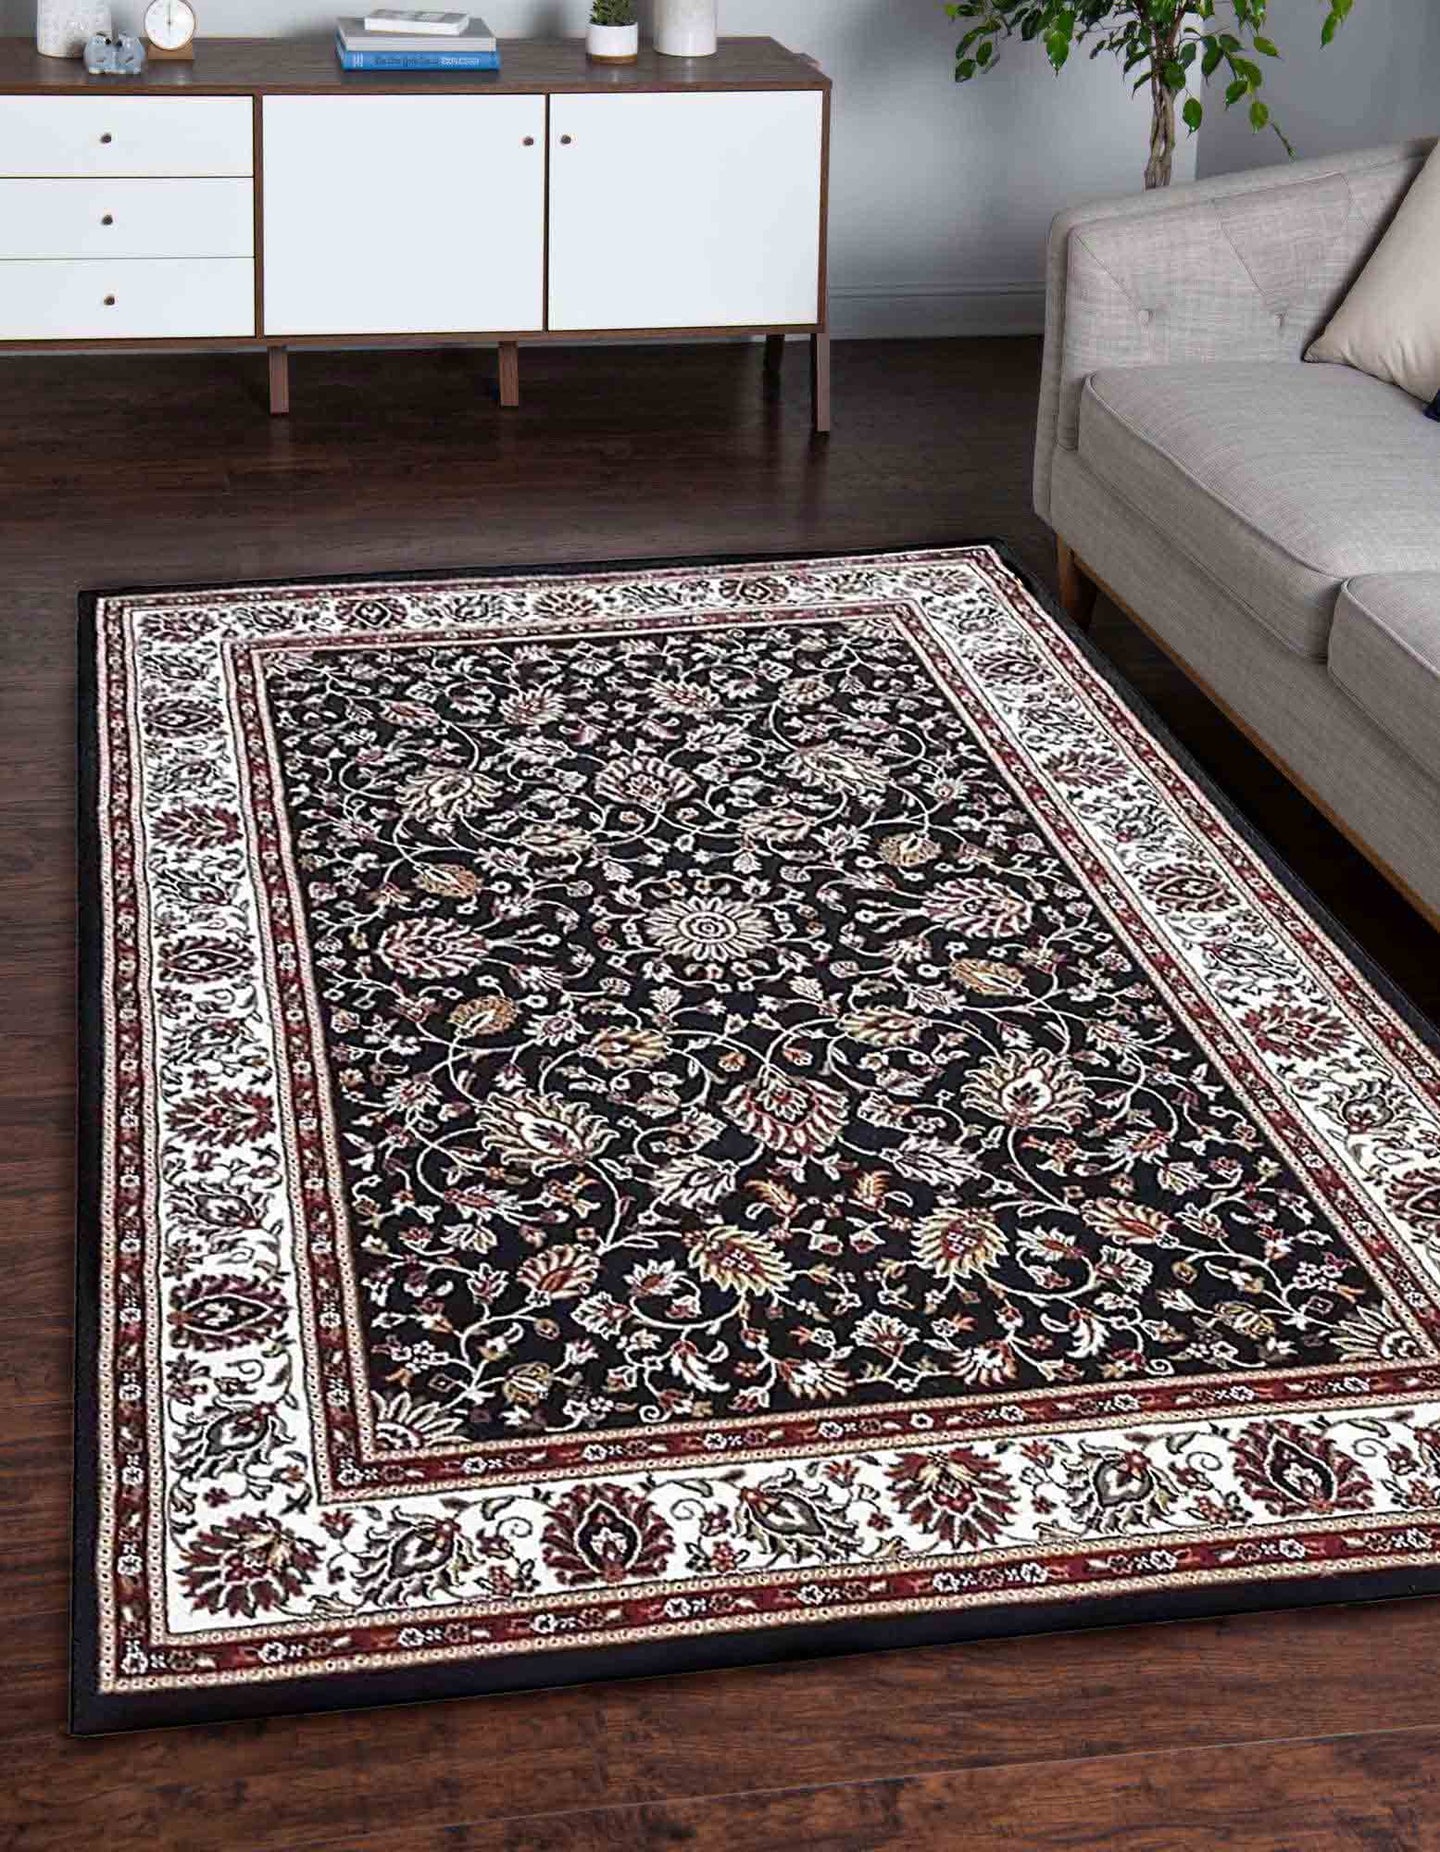 RUG ROOT Beautiful Persian Carpet Black Color From All India Choice Collection